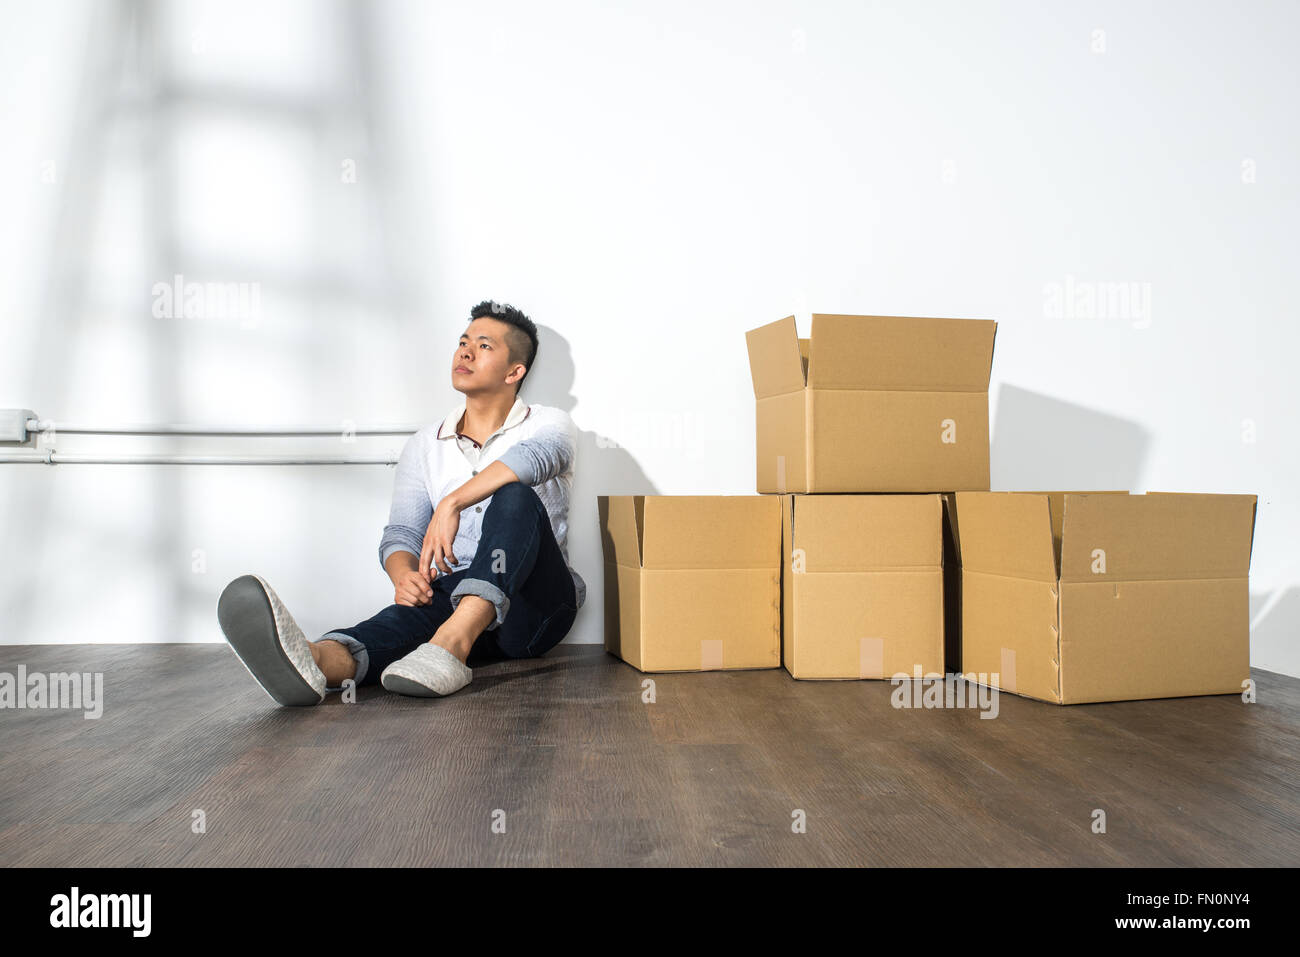 https://c8.alamy.com/comp/FN0NY4/a-yong-asian-man-sitting-on-floor-with-boxes-ladder-shadow-FN0NY4.jpg